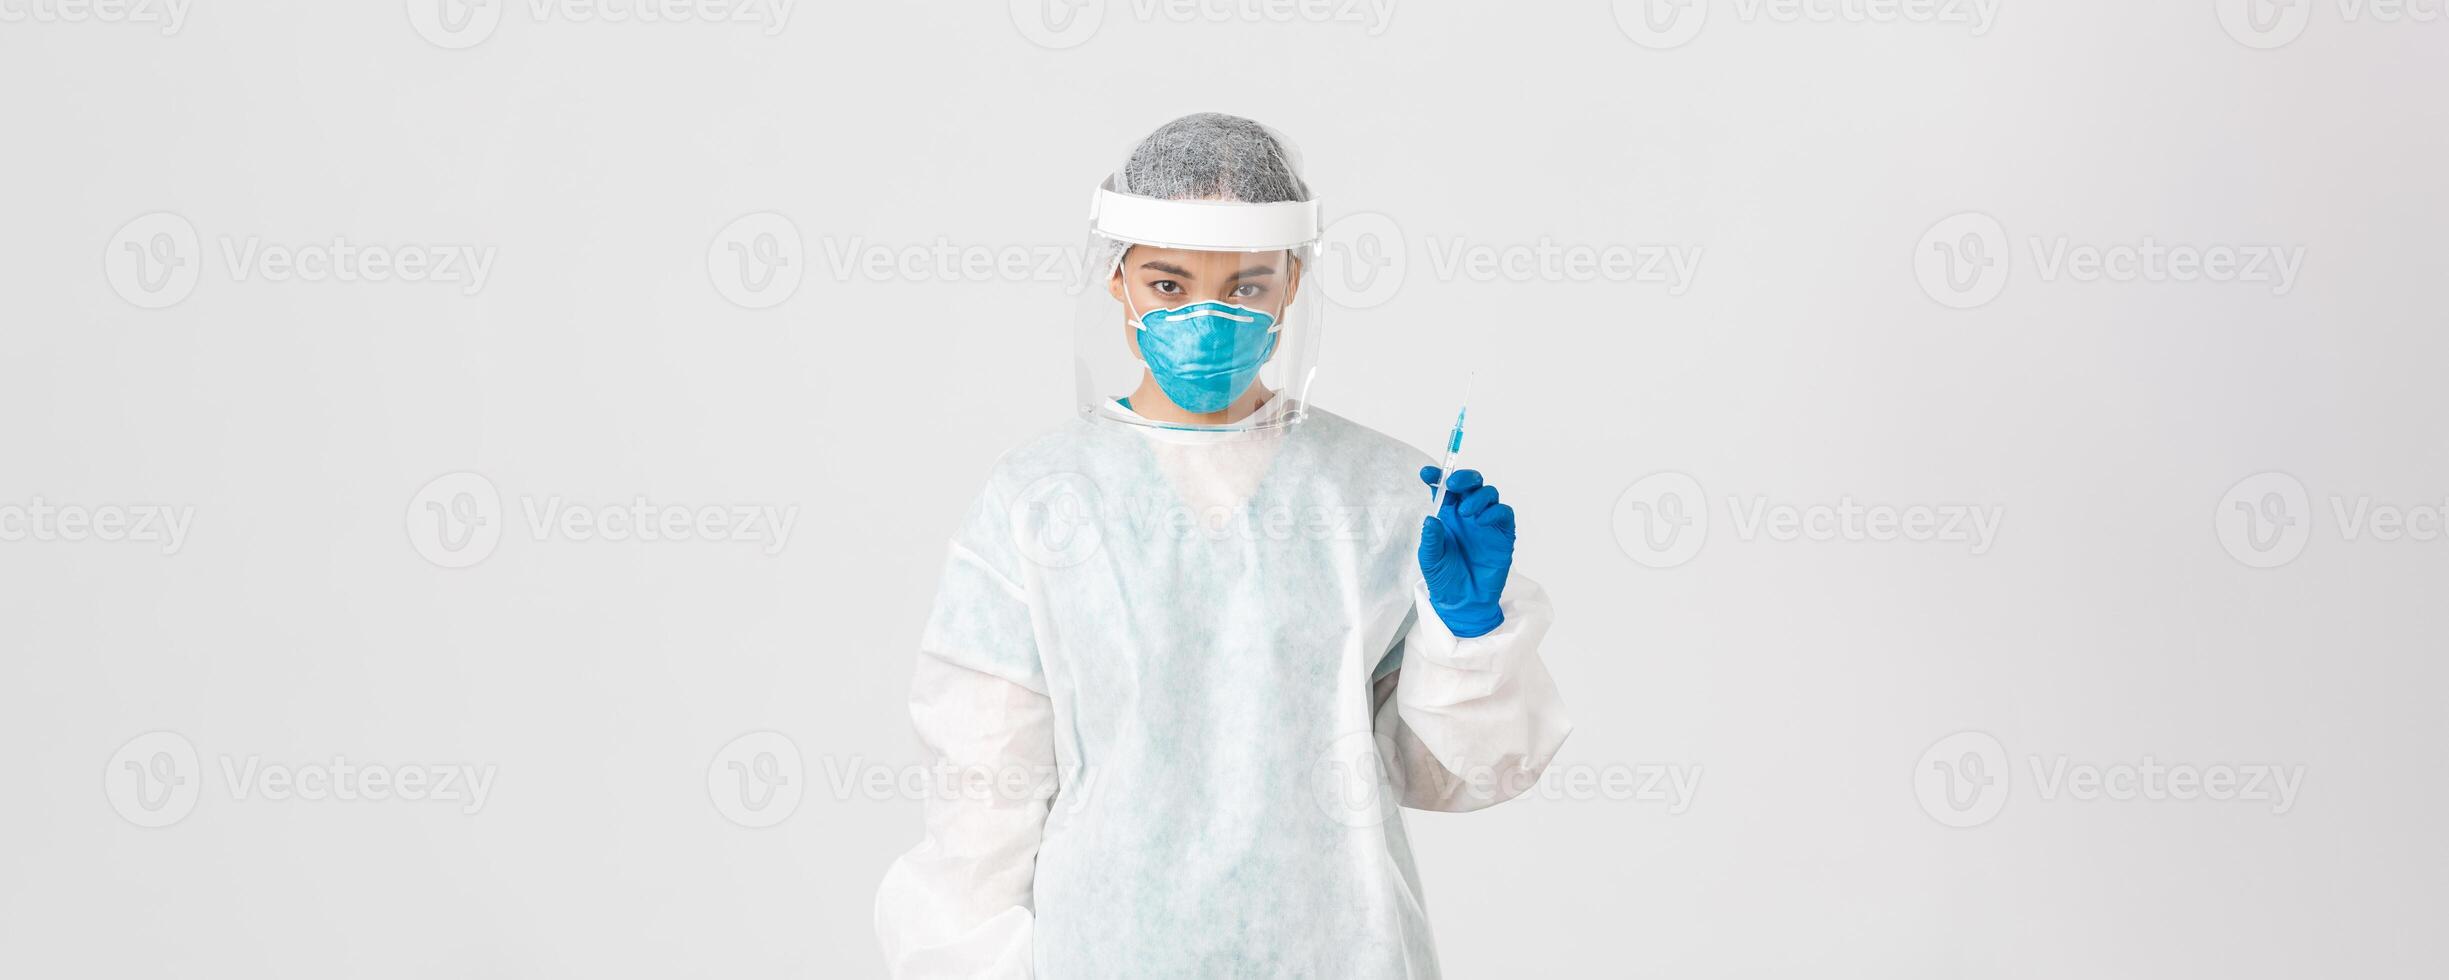 Covid-19, coronavirus disease, healthcare workers concept. Serious-looking confident asian female doctor in medical respirator and personal protective equipment, holding syringe with vaccine photo